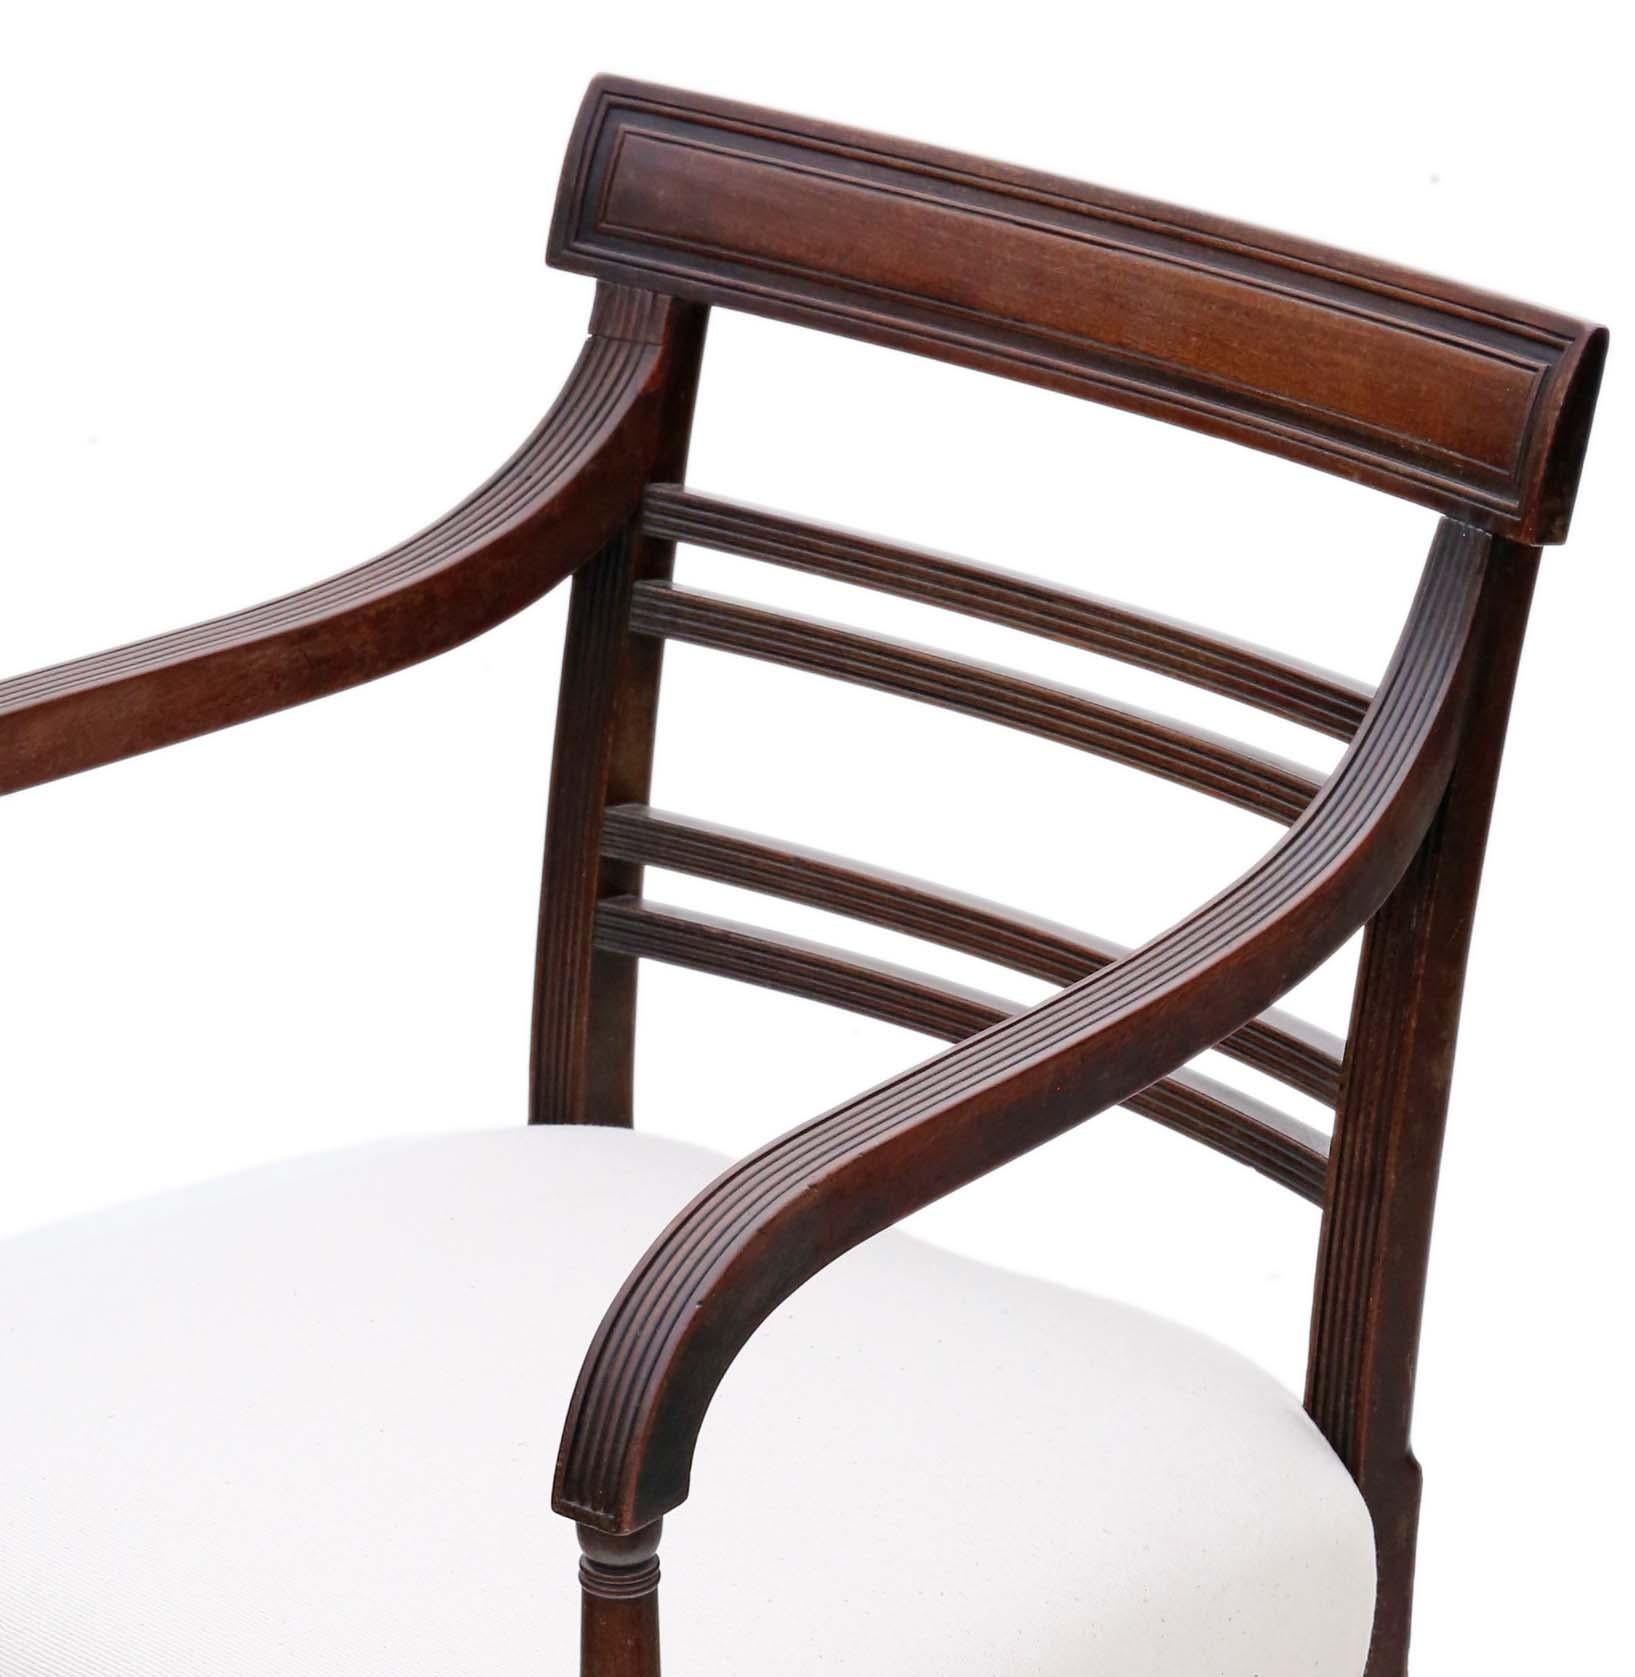 Early 19th Century Mahogany Dining Chairs: Set of 8 (6+2) Antique Quality, C1810 For Sale 5